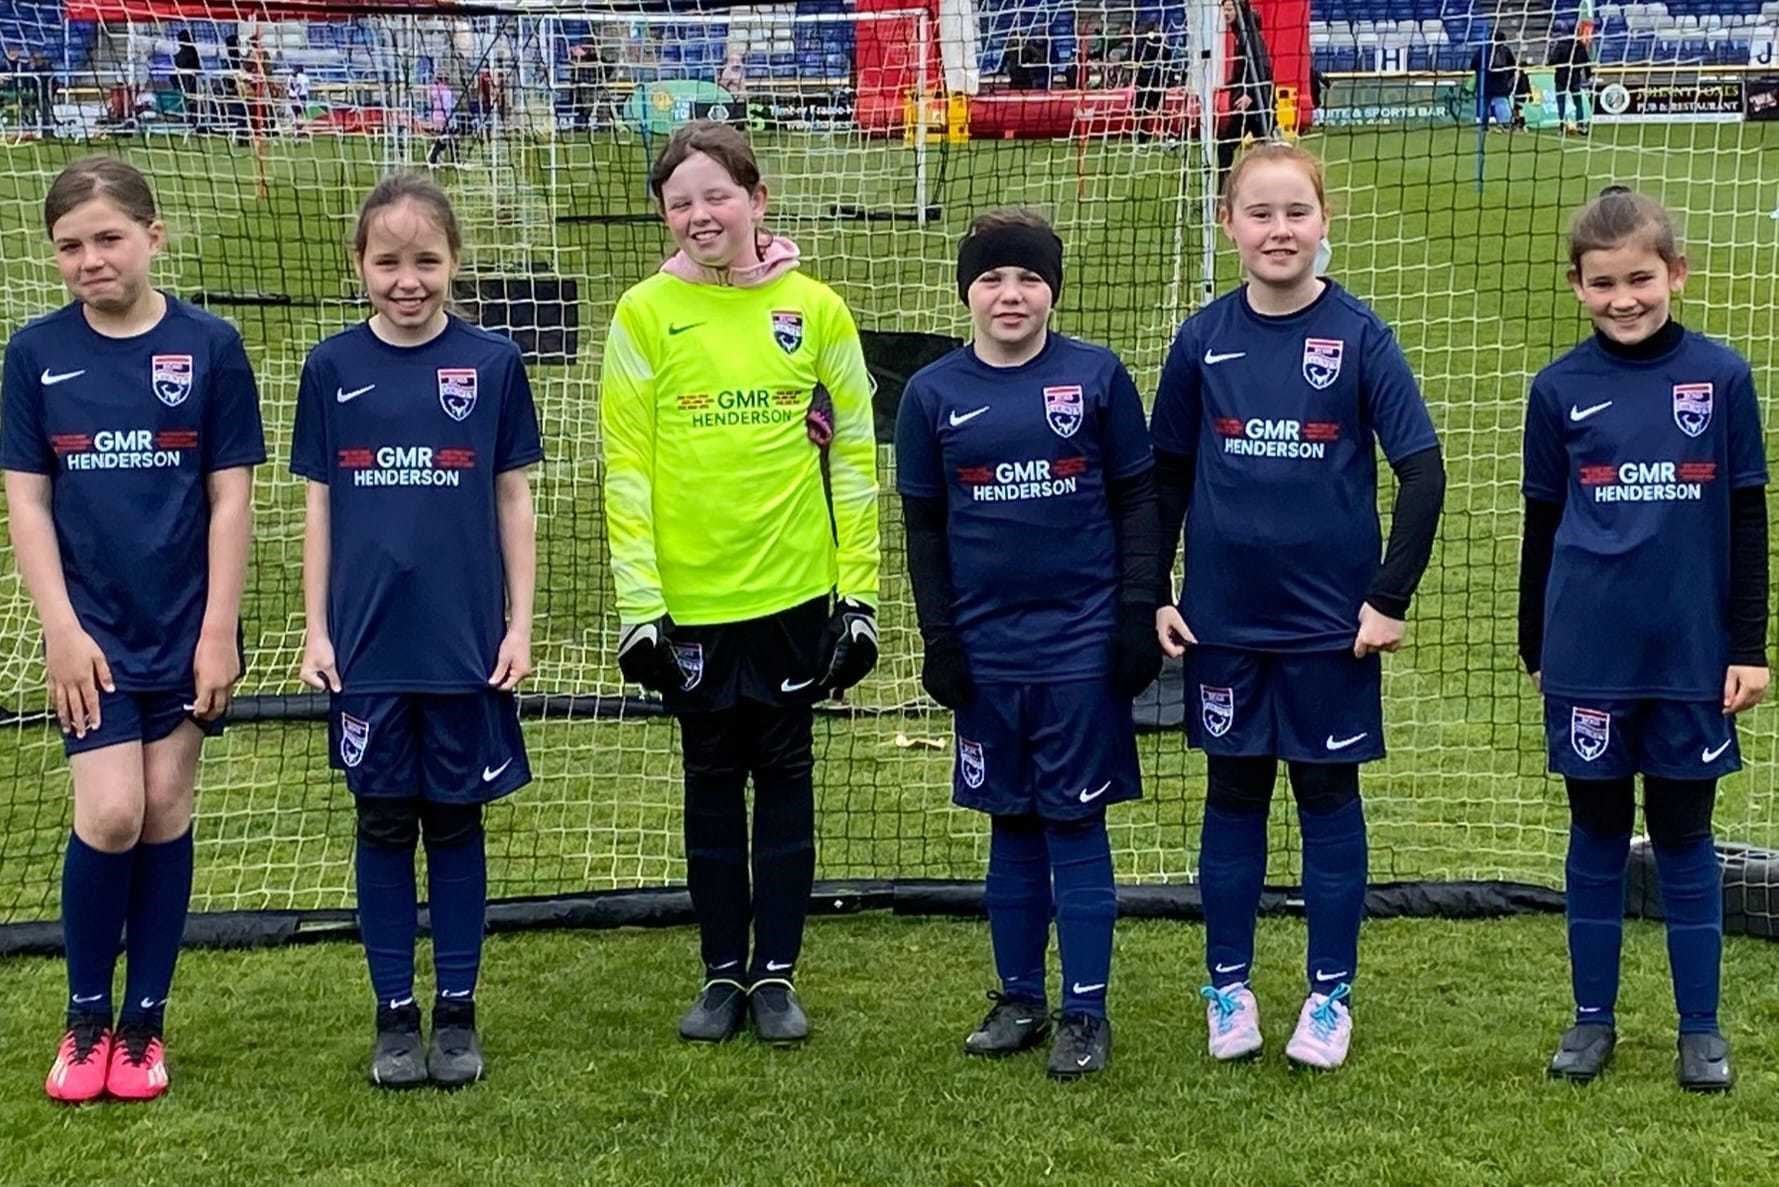 Some of the U10 team who train with Ross County Girls and Women Football Club.